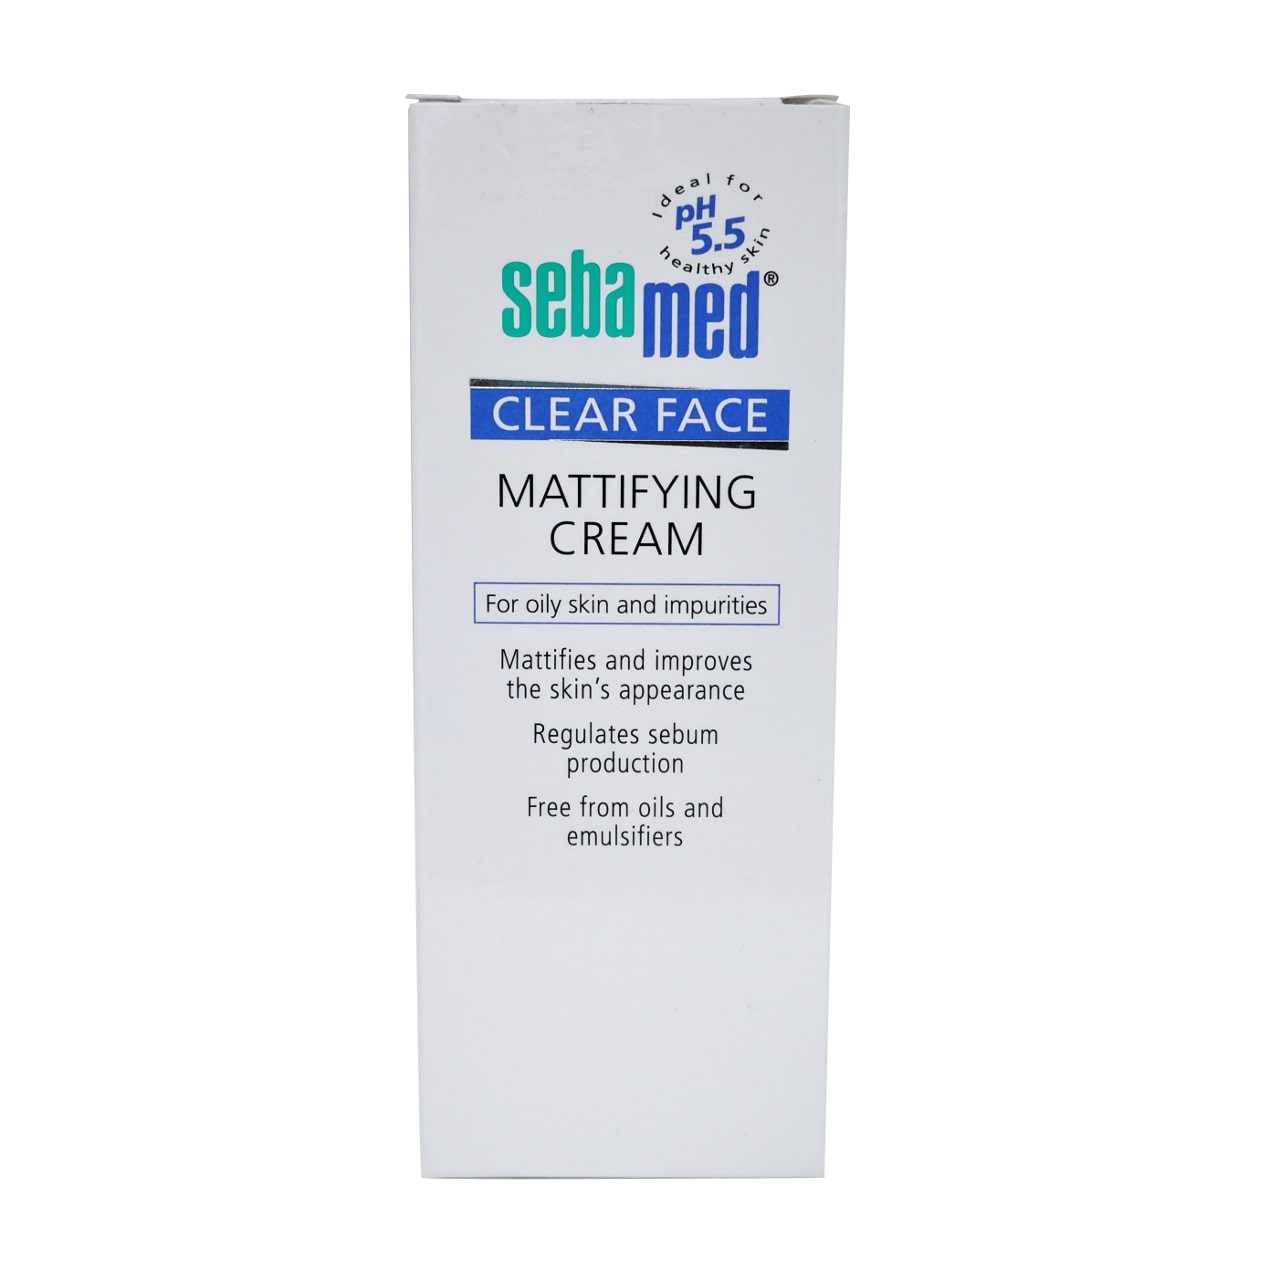 Product label for Sebamed Clear Face Mattifying Cream in English